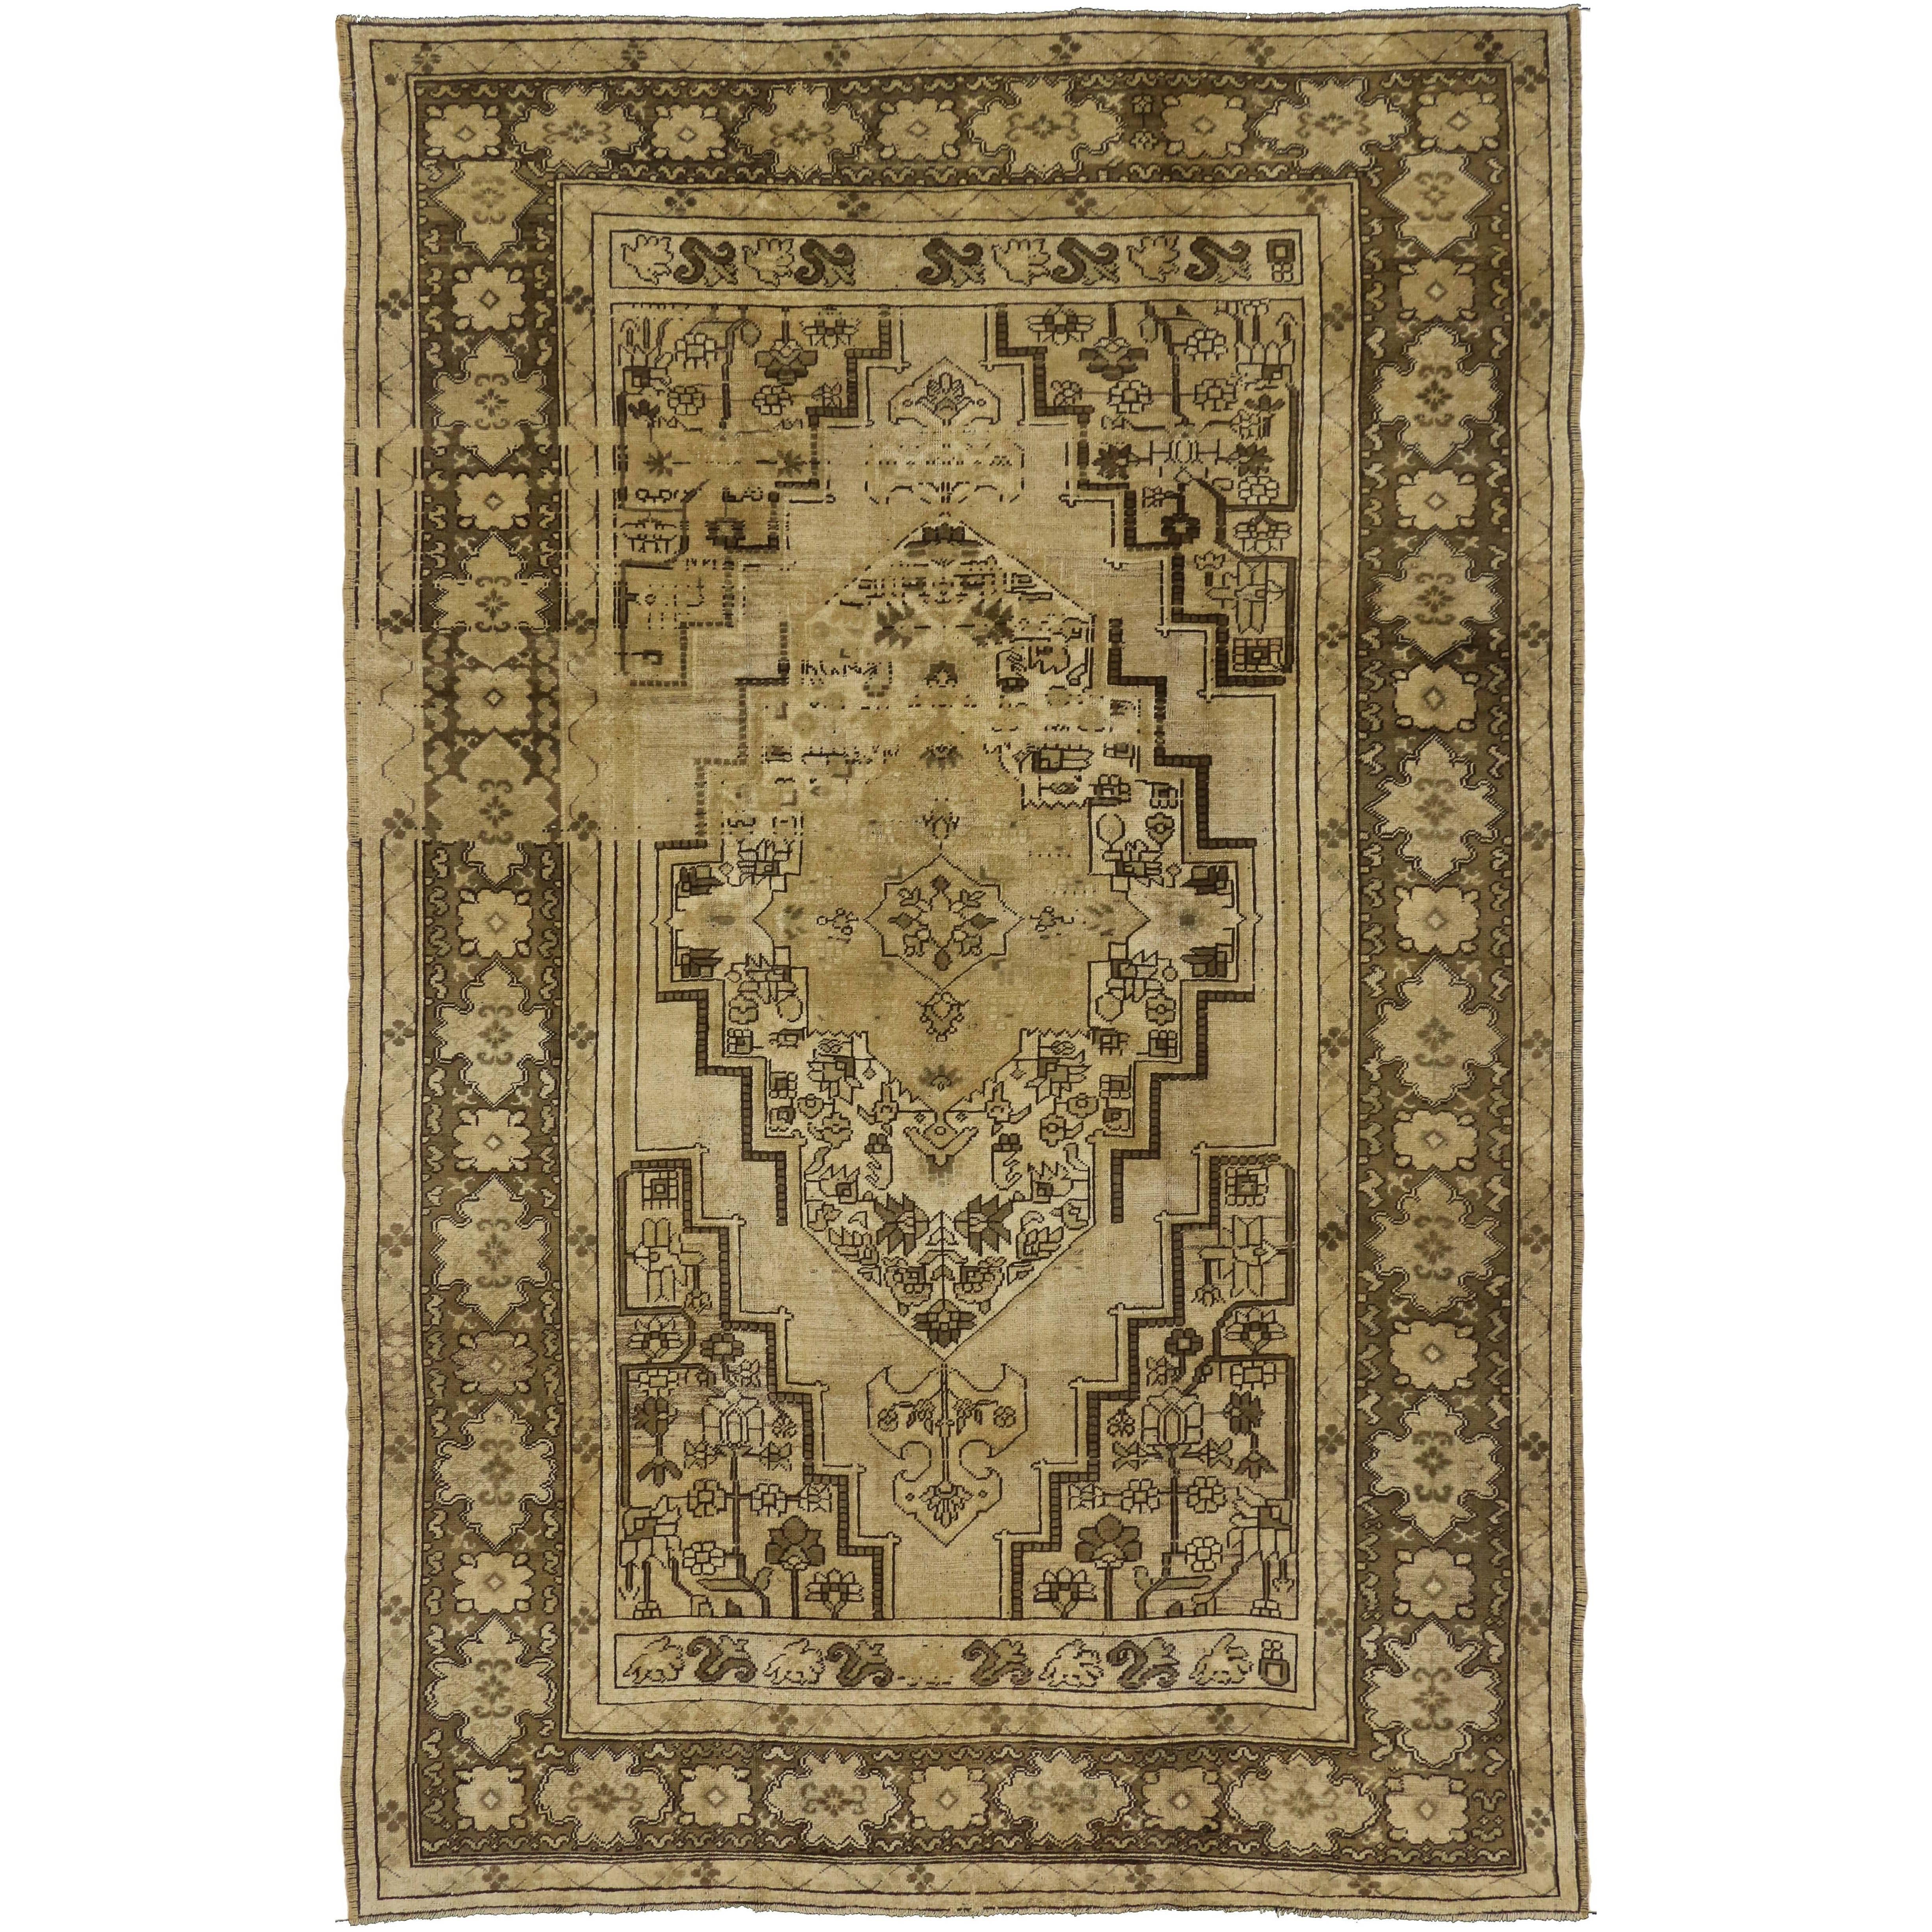 Vintage Turkish Oushak Rug with Traditional Style and Warm Earth-Tones